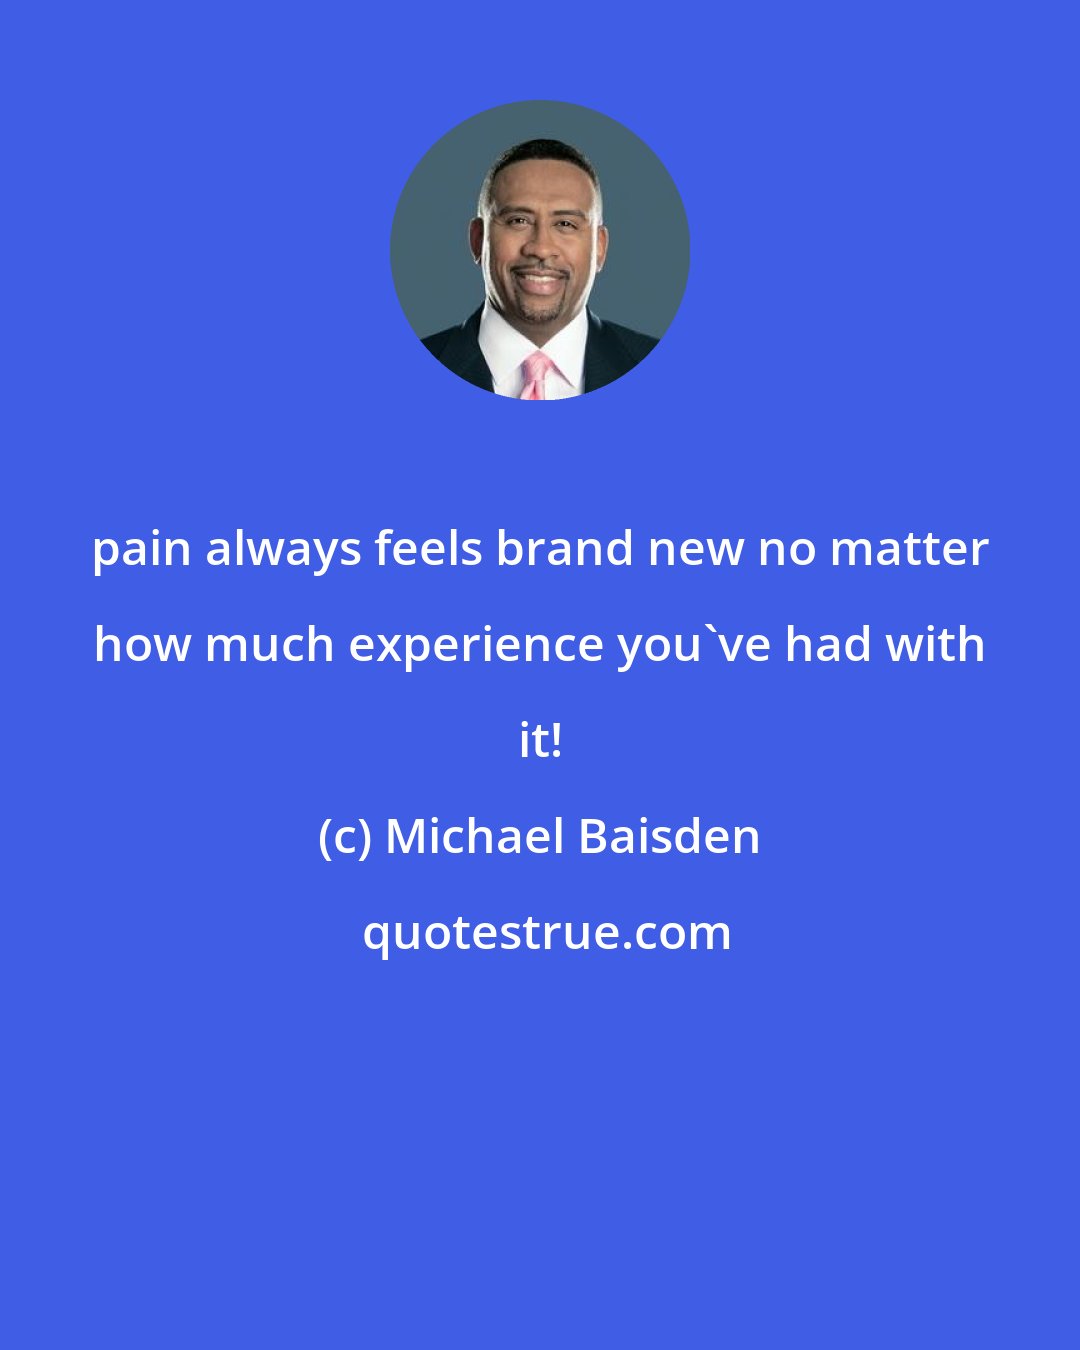 Michael Baisden: pain always feels brand new no matter how much experience you've had with it!